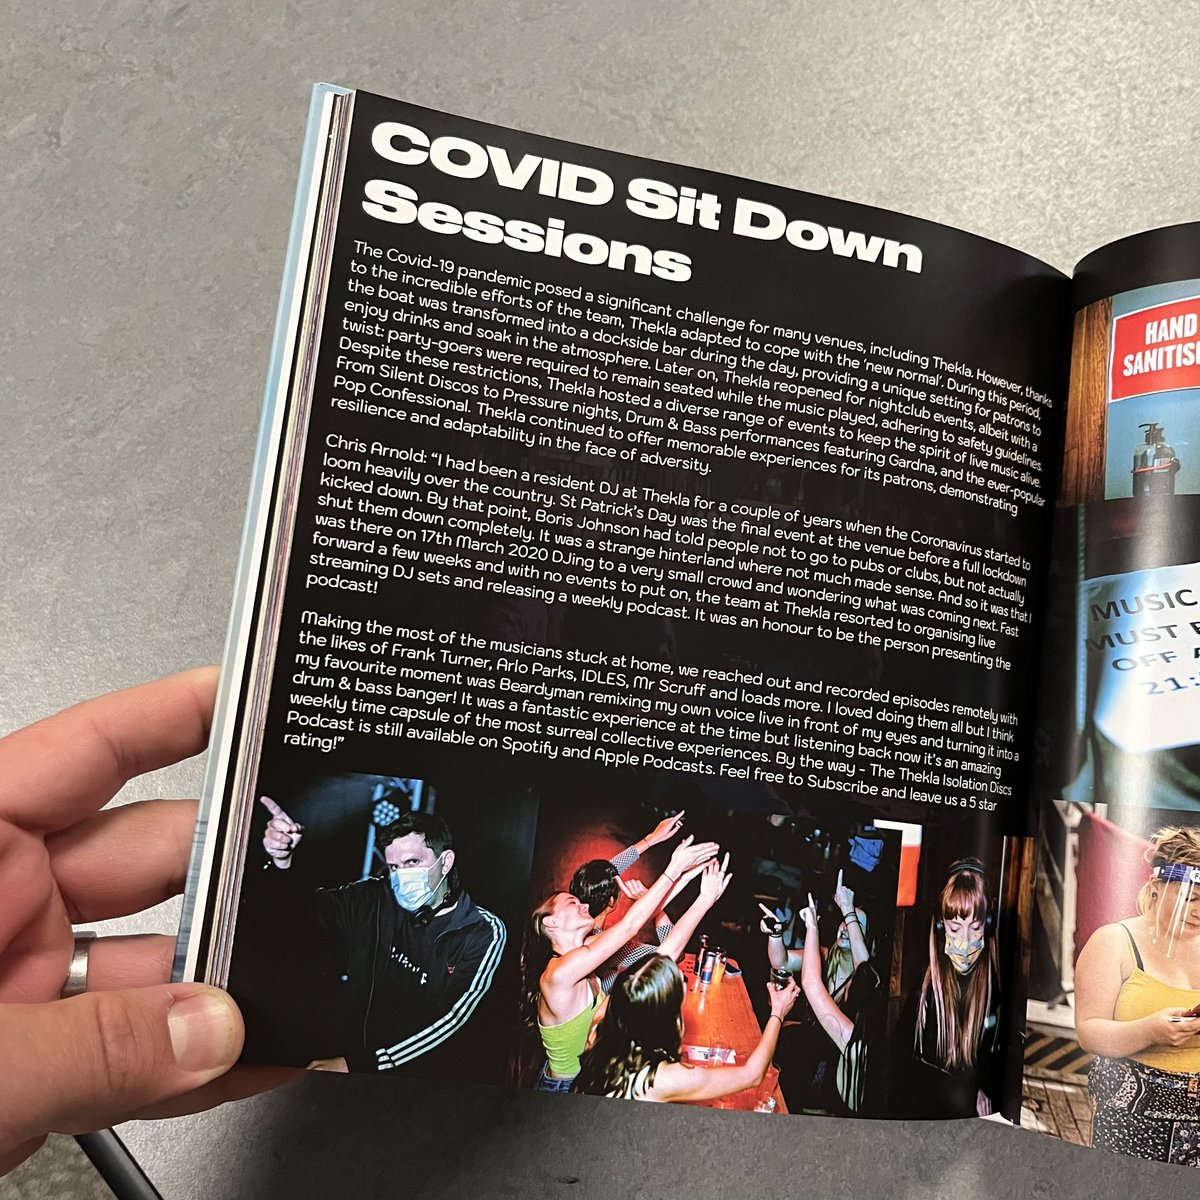 A very happy 40th birthday to a venue very close to my heart - @theklabristol! From being a resident DJ there to hosting their podcast during the covid lockdowns, I have a lot of love for this nightclub on a boat and I'm delighted to be featured in their brand new book!